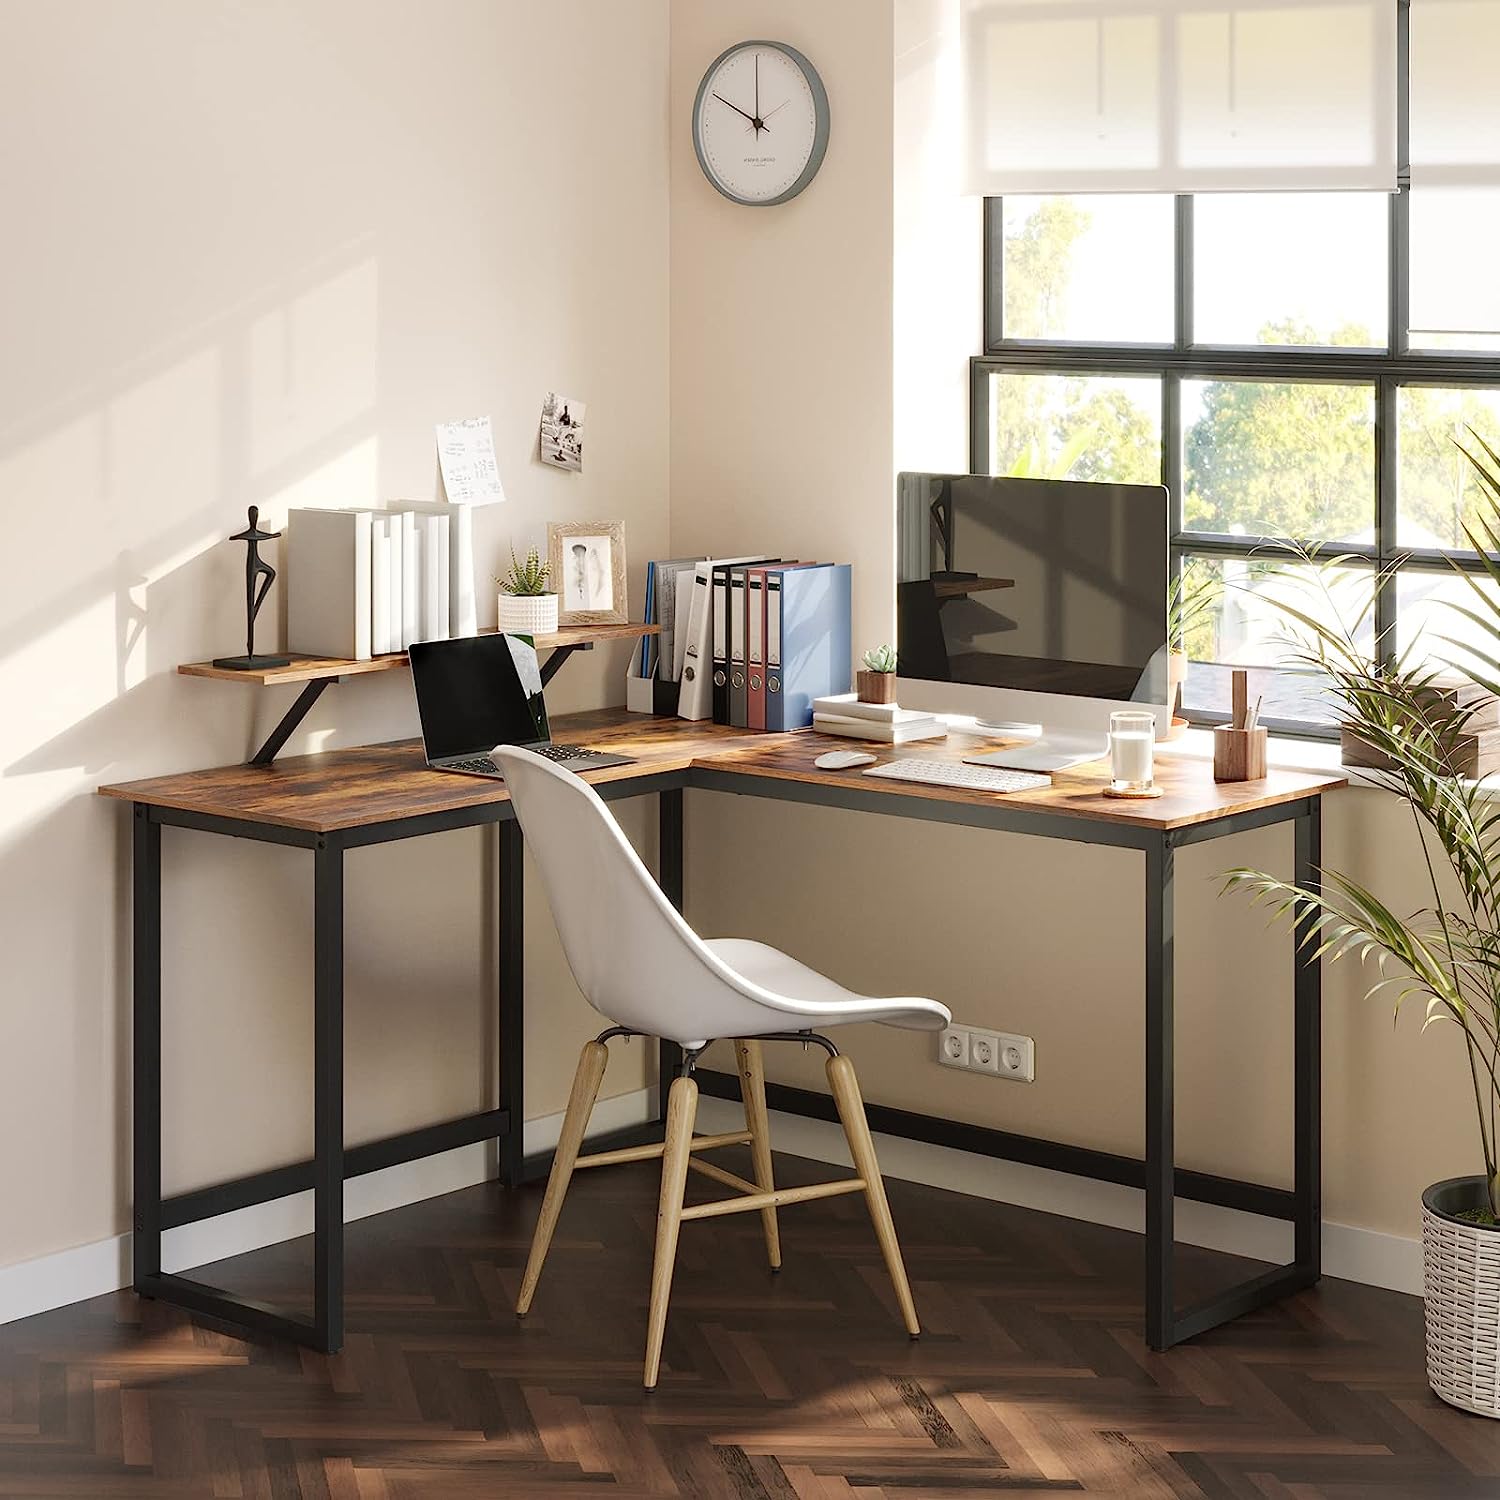 L-Shaped Desk with Screen Stand for Studying, Gaming, Working, Space-Saving, Adjustable Legs